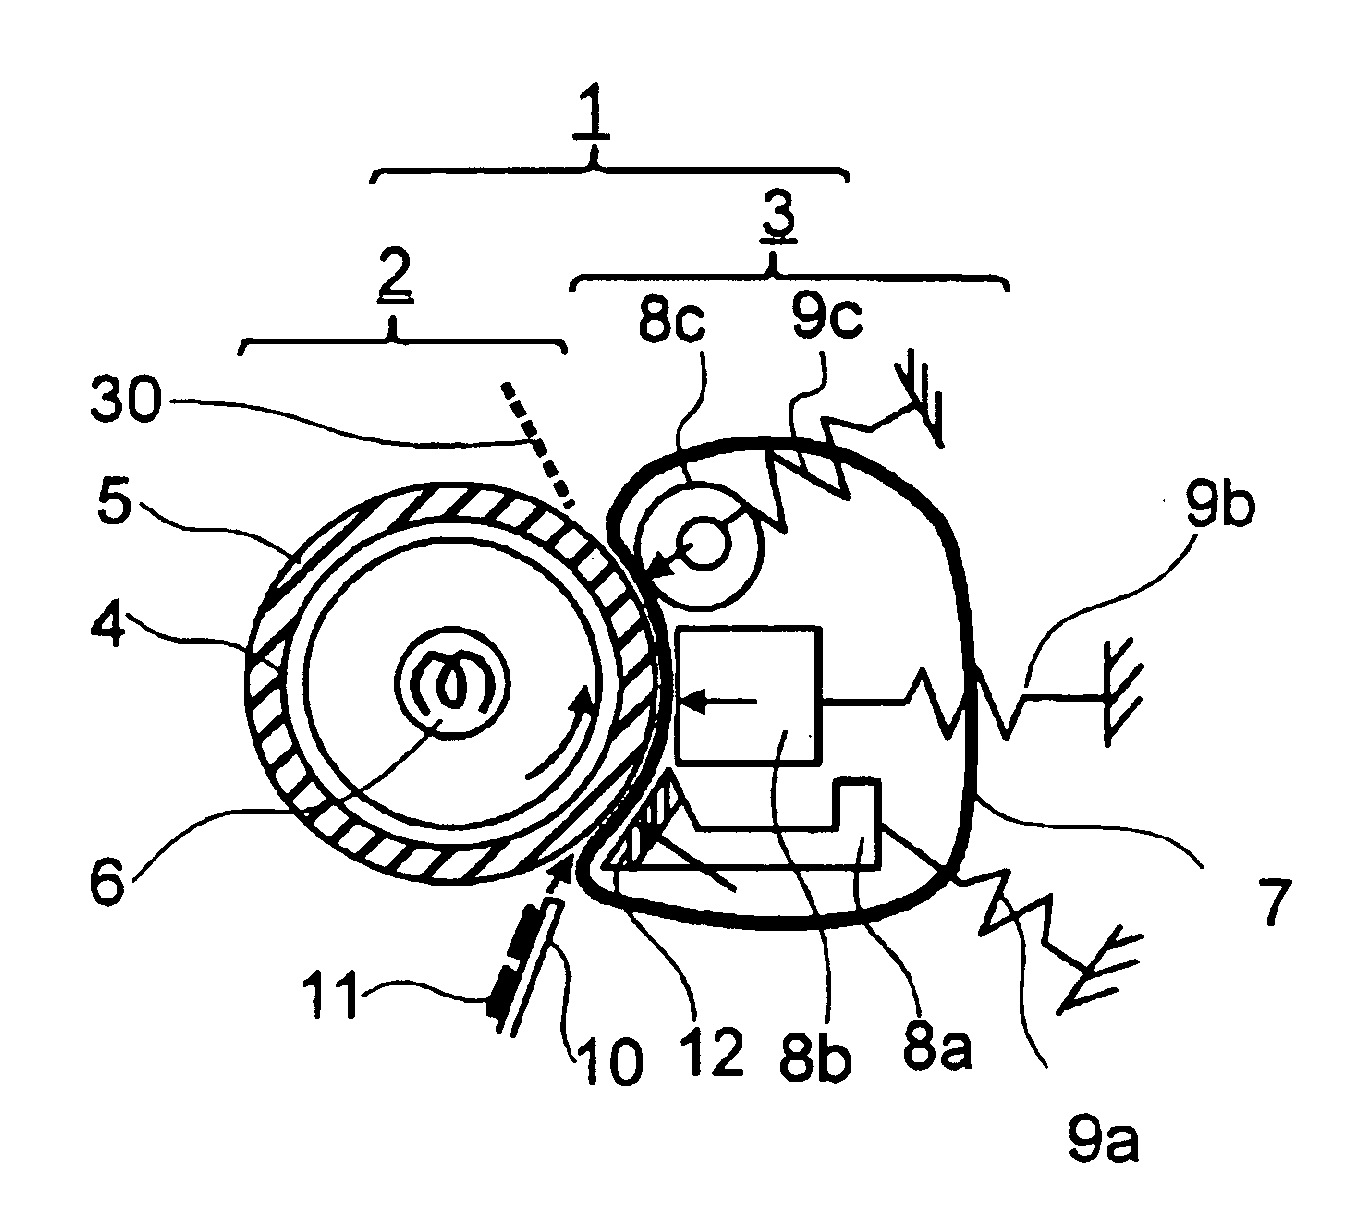 Image forming and recording apparatus with three pressure members